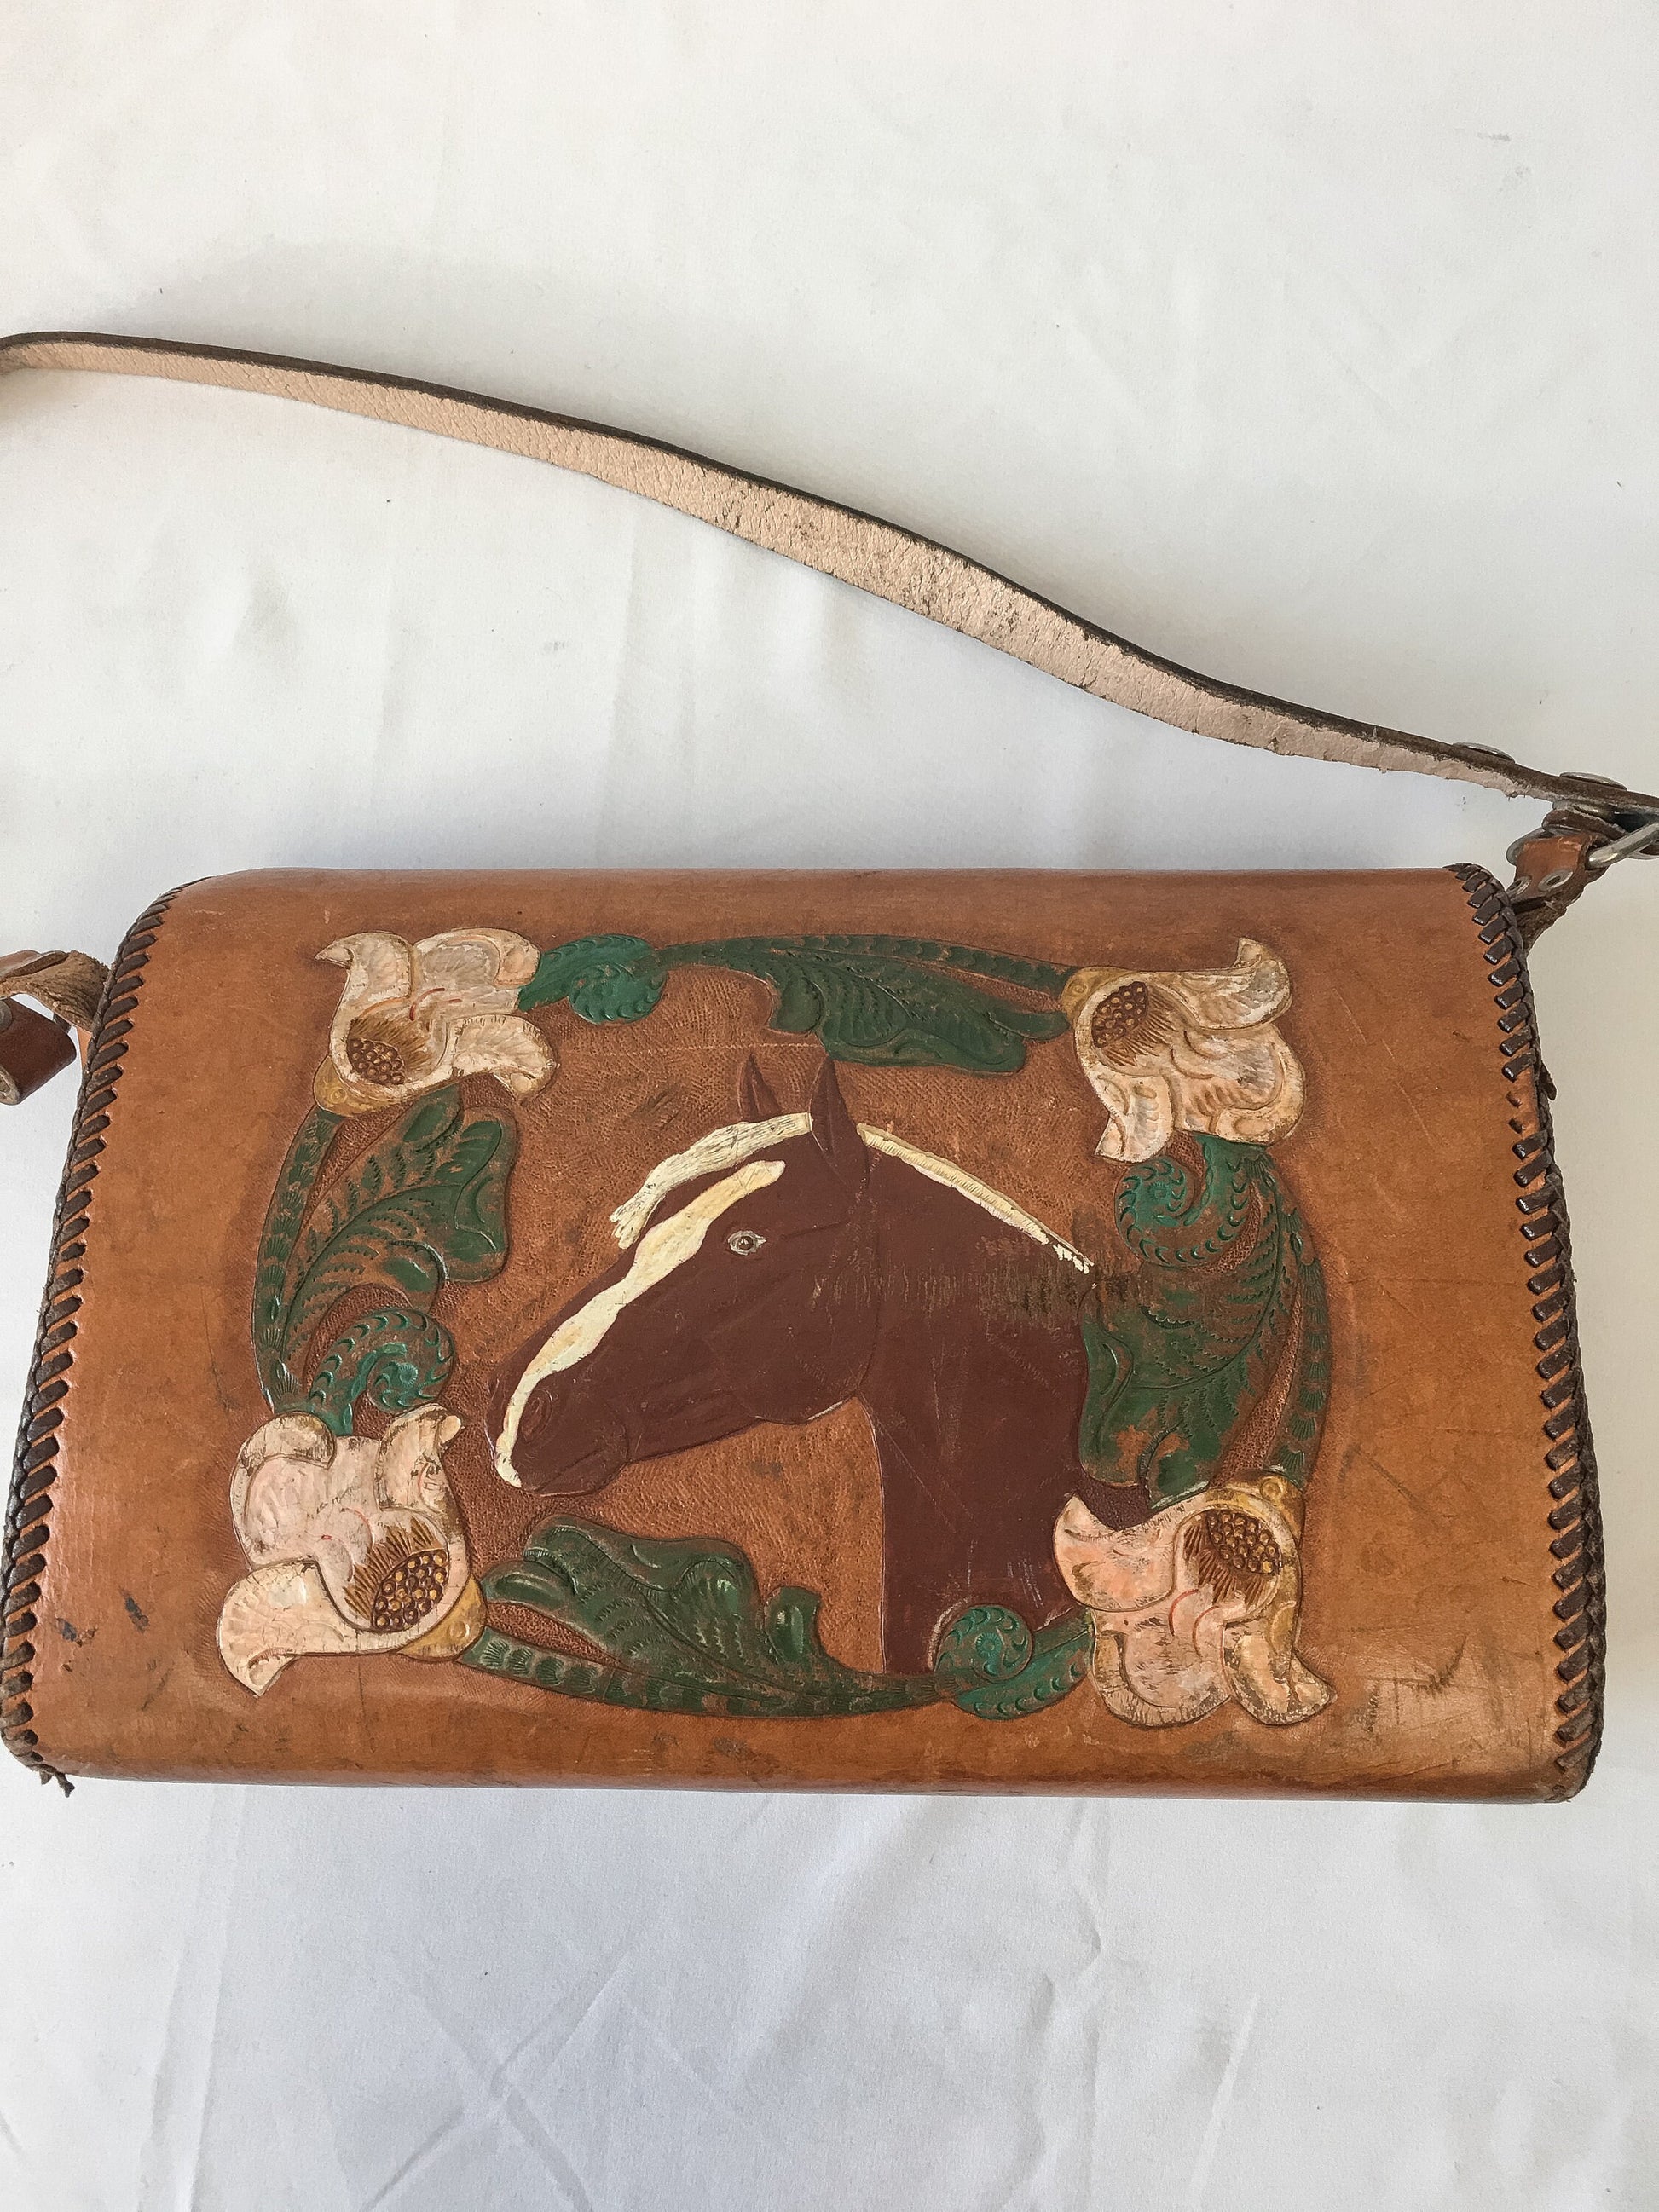 Vintage Handcrafted Brown Tooled Leather Bag with Engraved Floral and Horse Detail